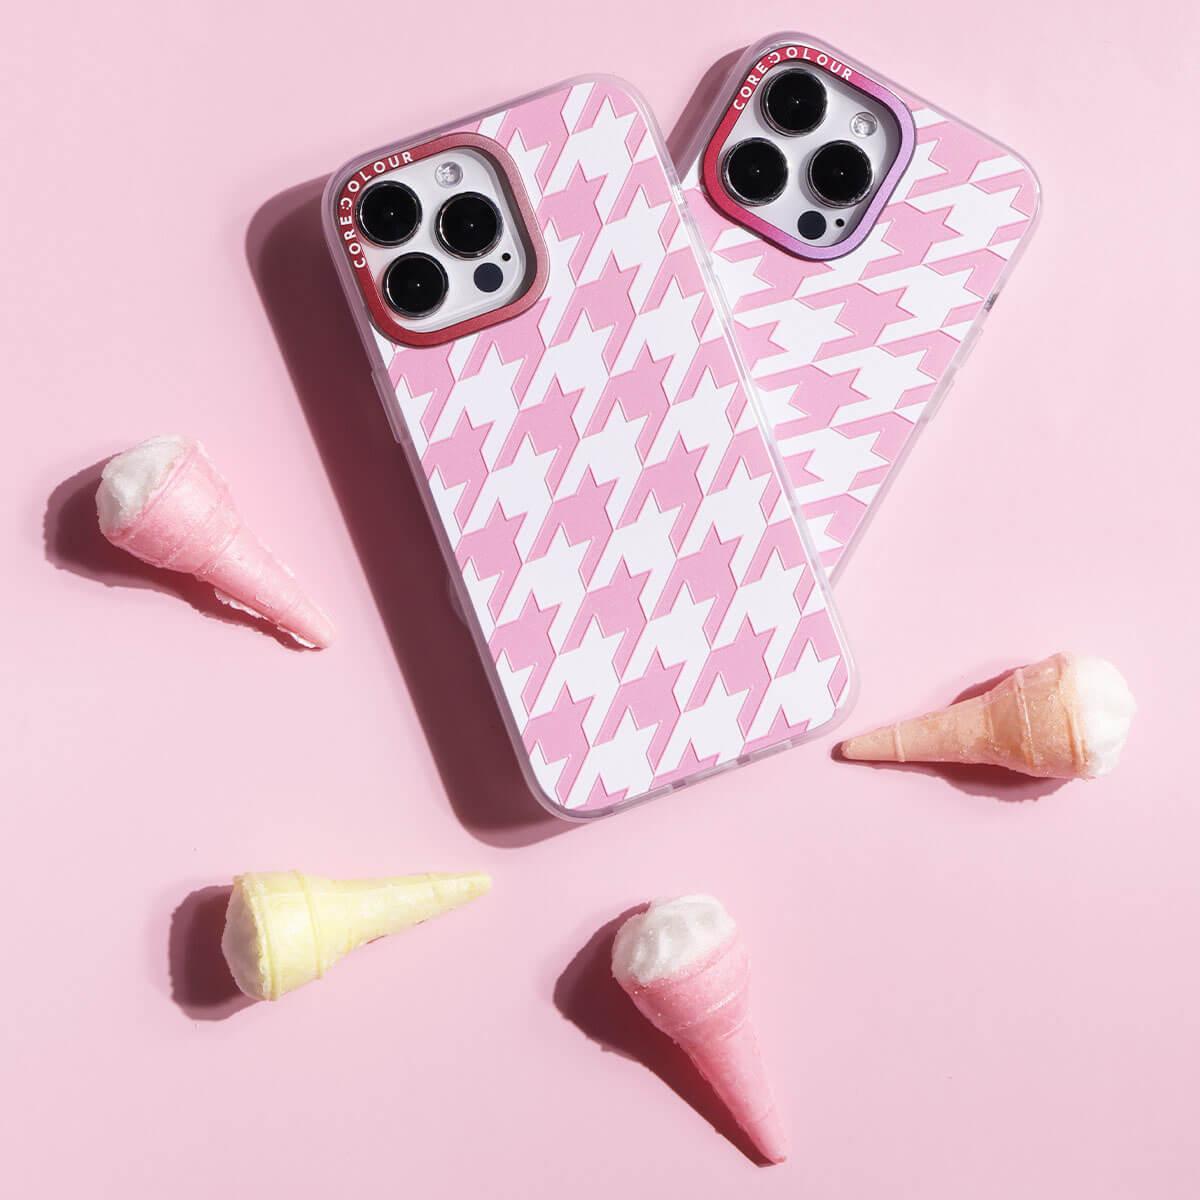 iPhone 12 Pro Max Pink Houndstooth Phone Case - CORECOLOUR